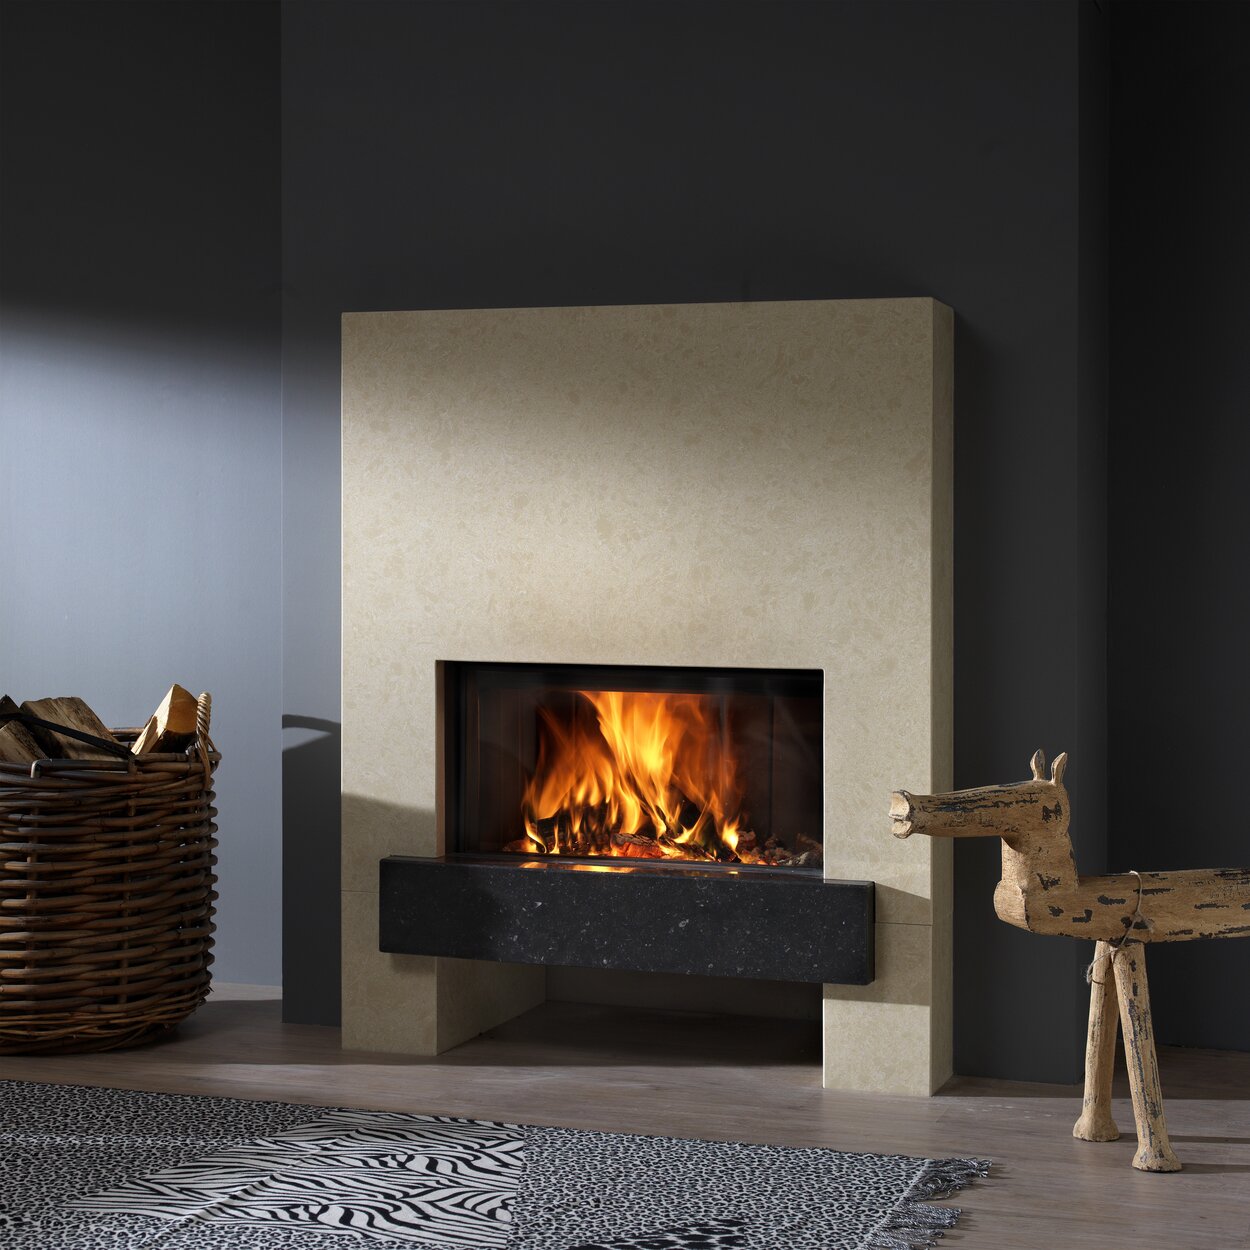 Wood fireplace W70/33F by Kalfire with natural stone cladding in cream-coloured stone against a grey wall